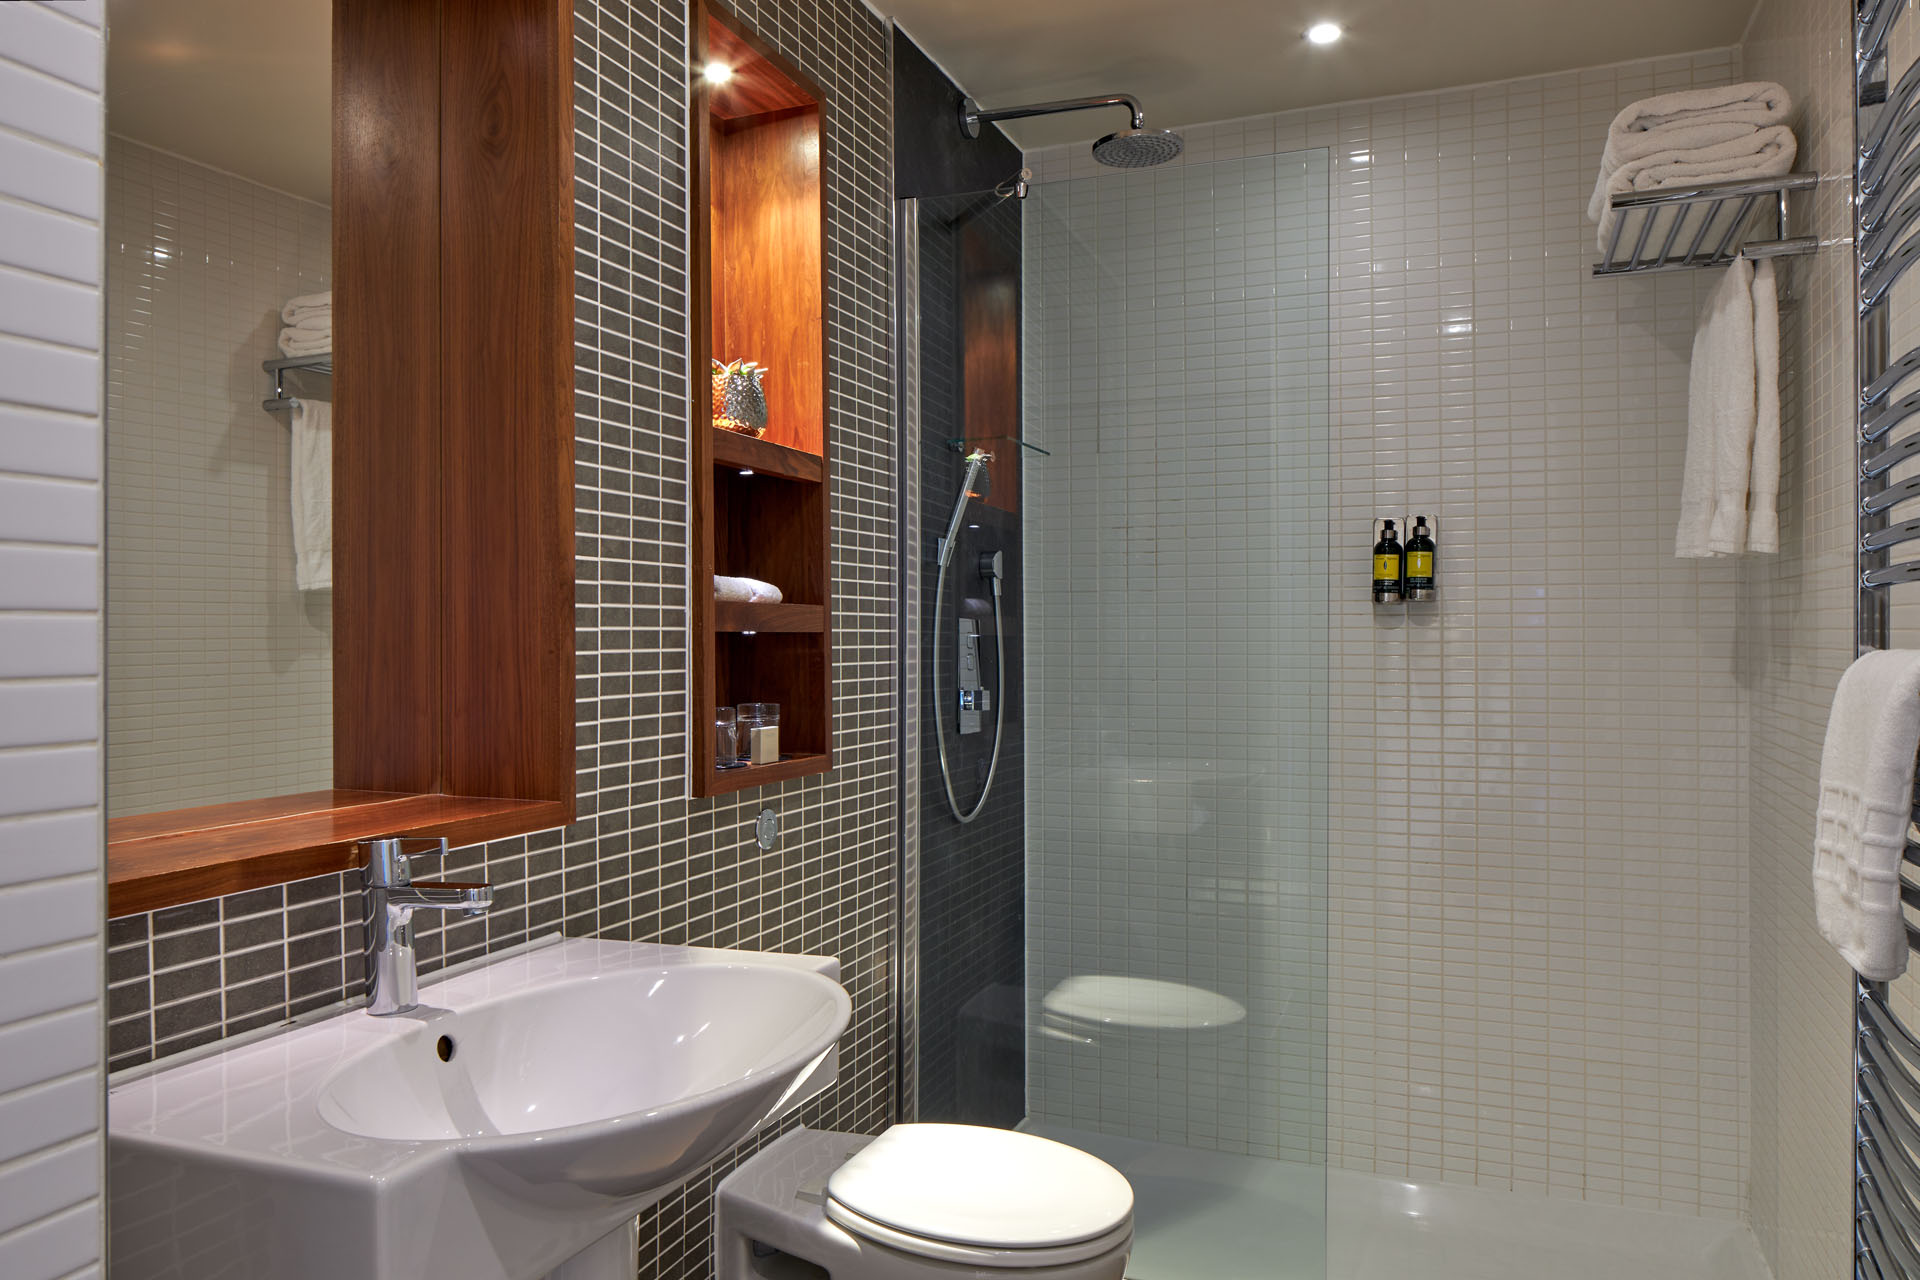 Bathroom of Classic Deluxe Twin Room at Fraser aparthotel in Edinburgh